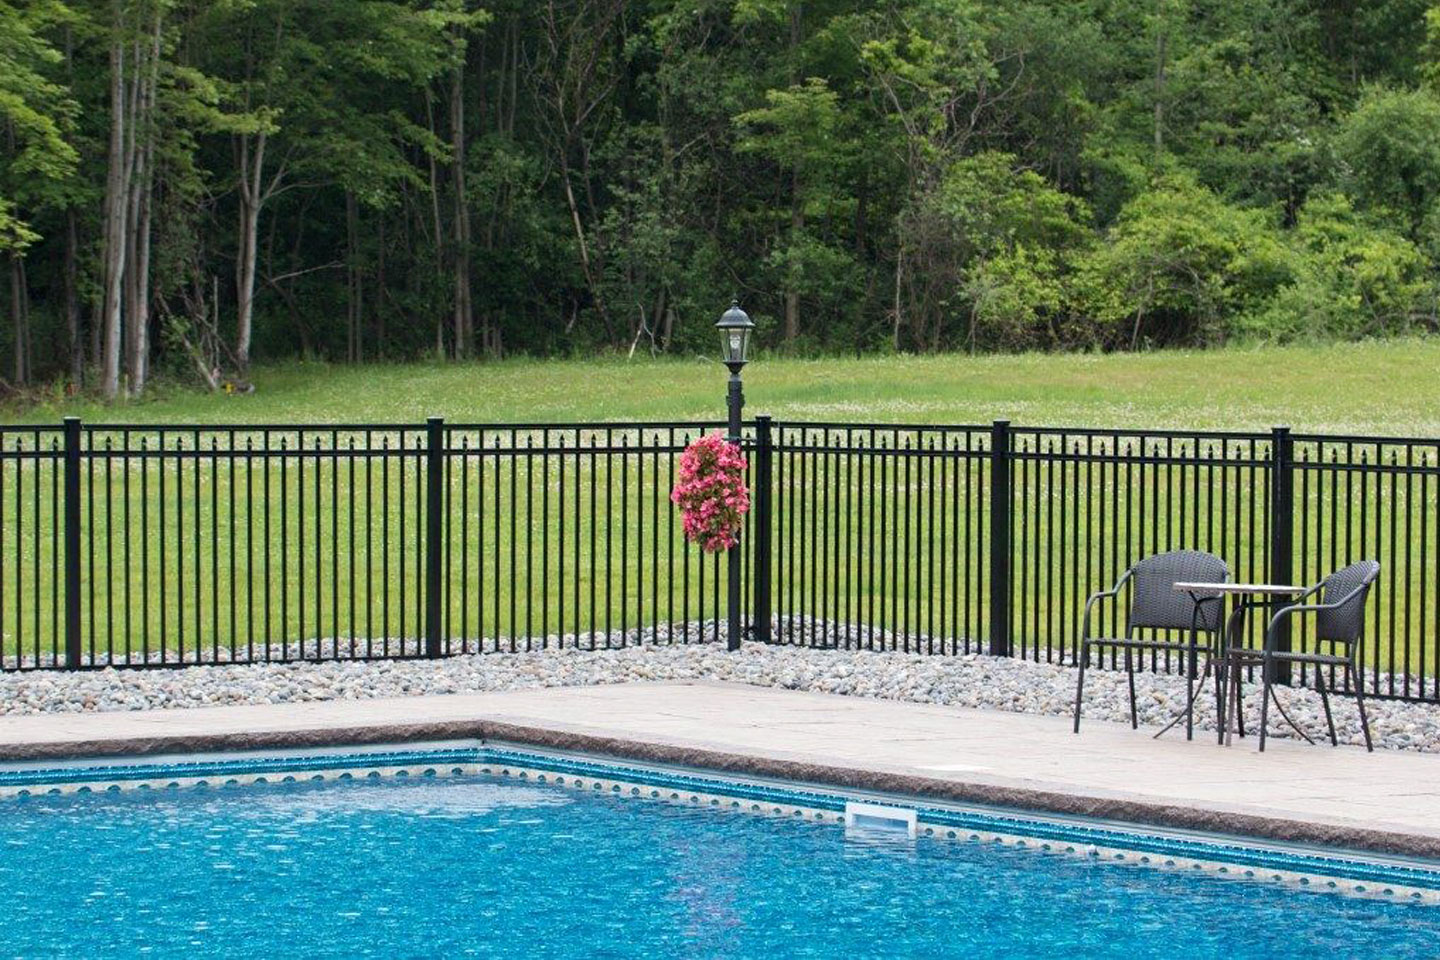 Pool Fence Designs & Pictures | Pool Fence Regulations Explained | Blog